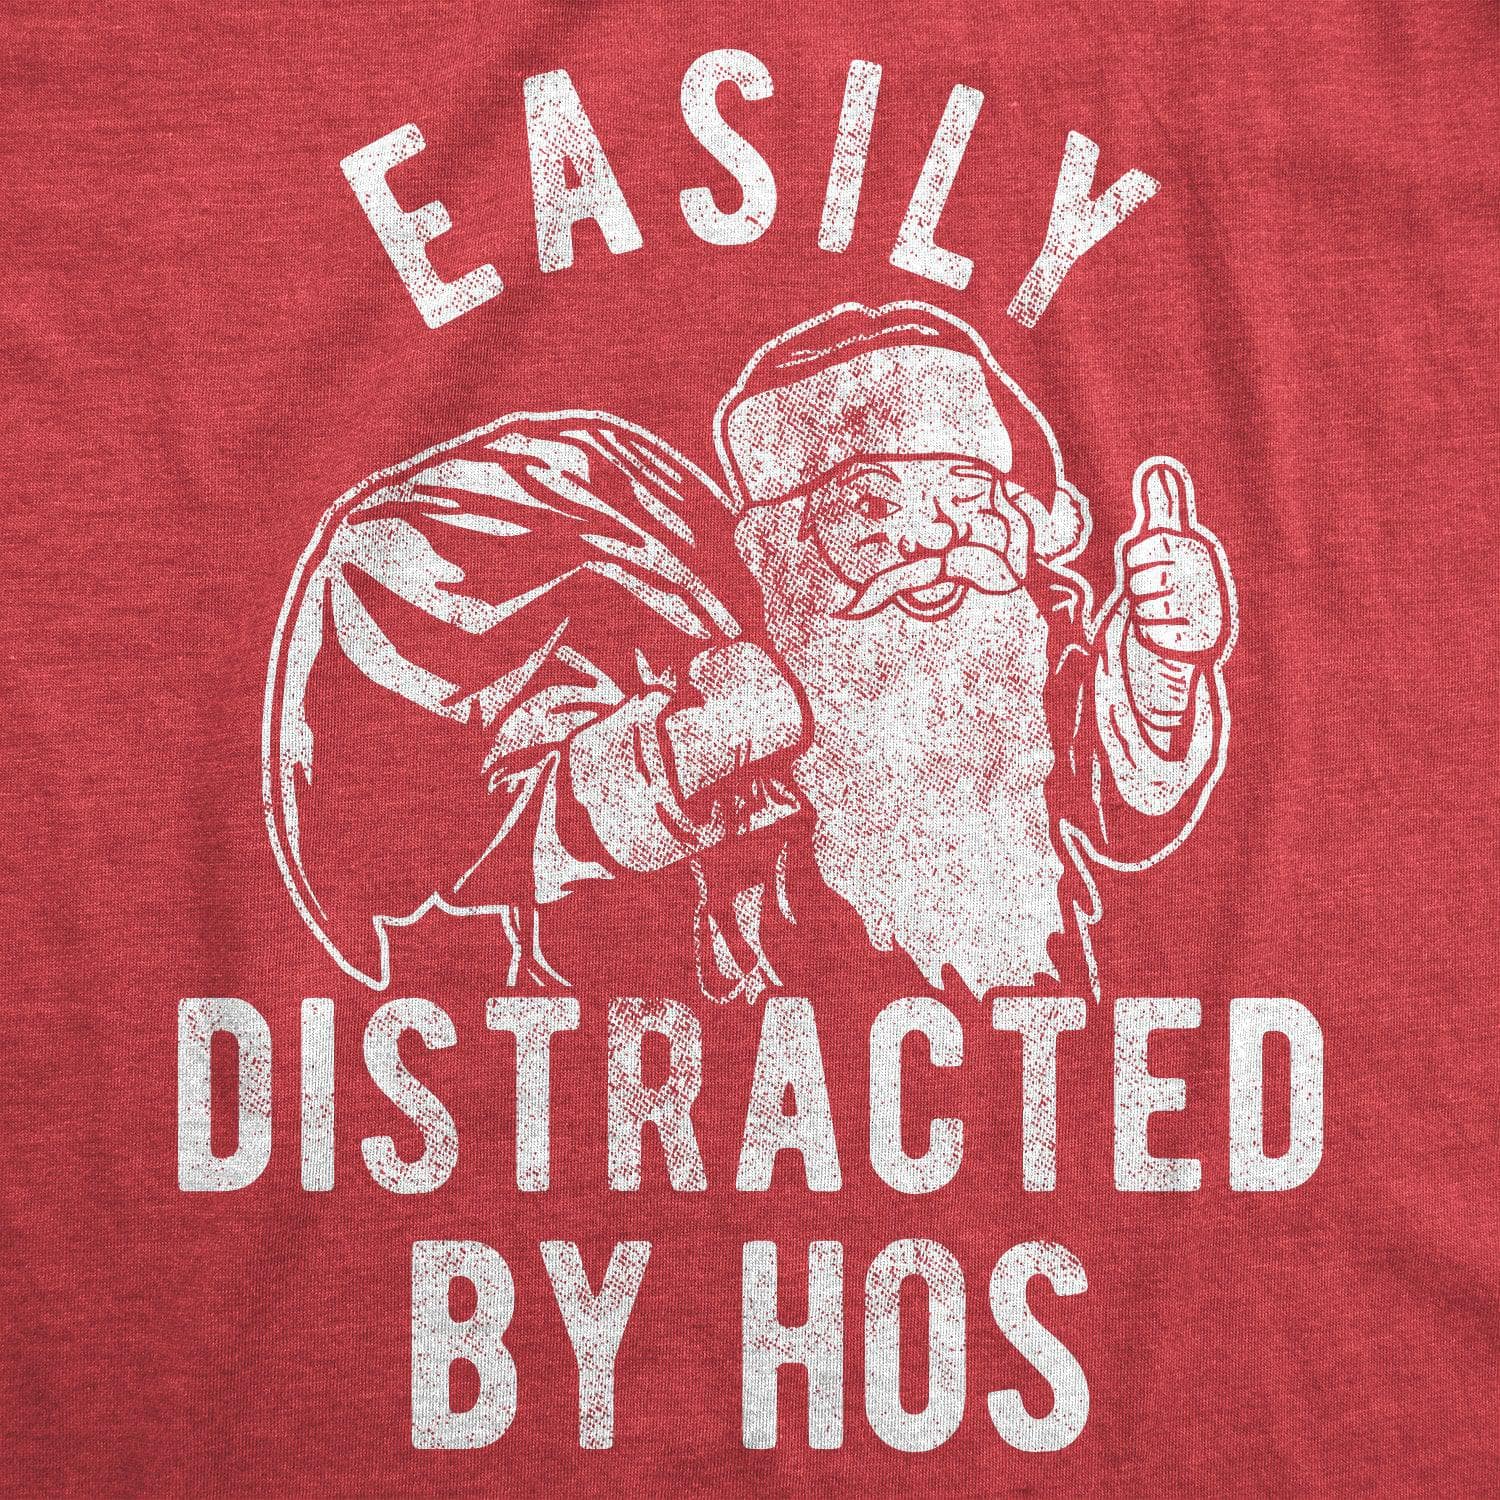 Easily Distracted By Hos Men's Tshirt  -  Crazy Dog T-Shirts